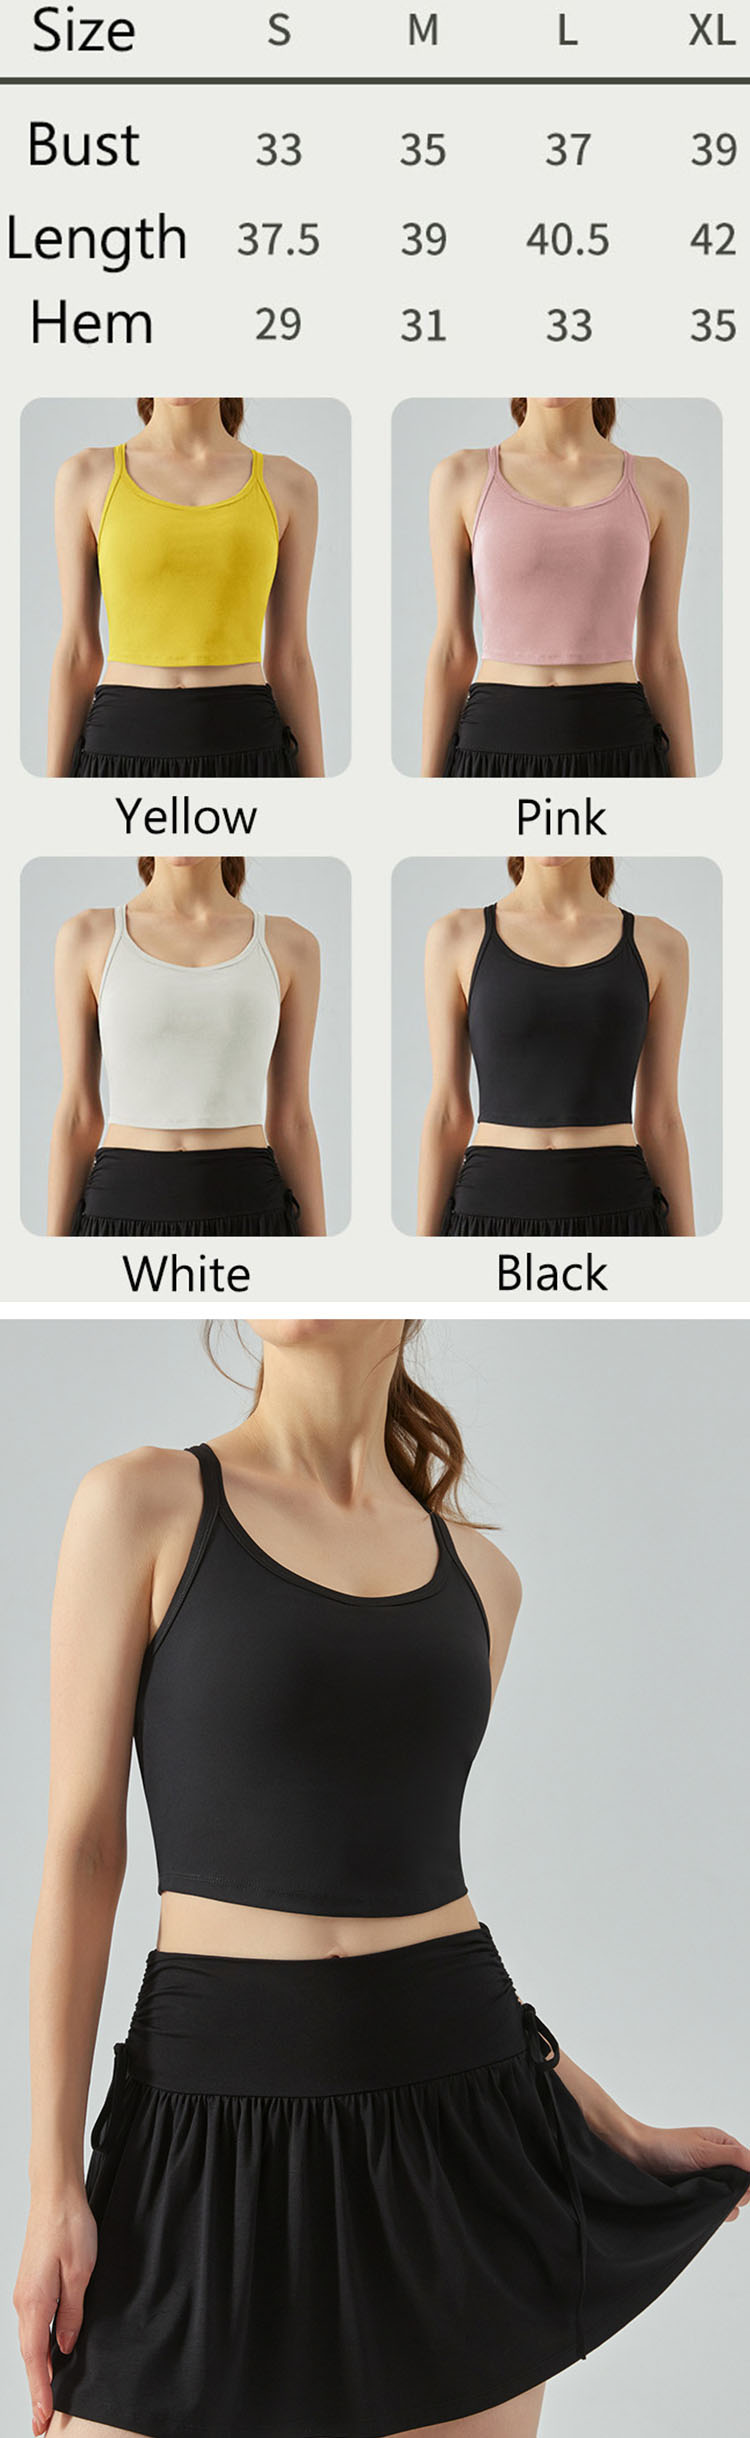 Gym tees for women create a light sports daily style with short styles and small suspenders